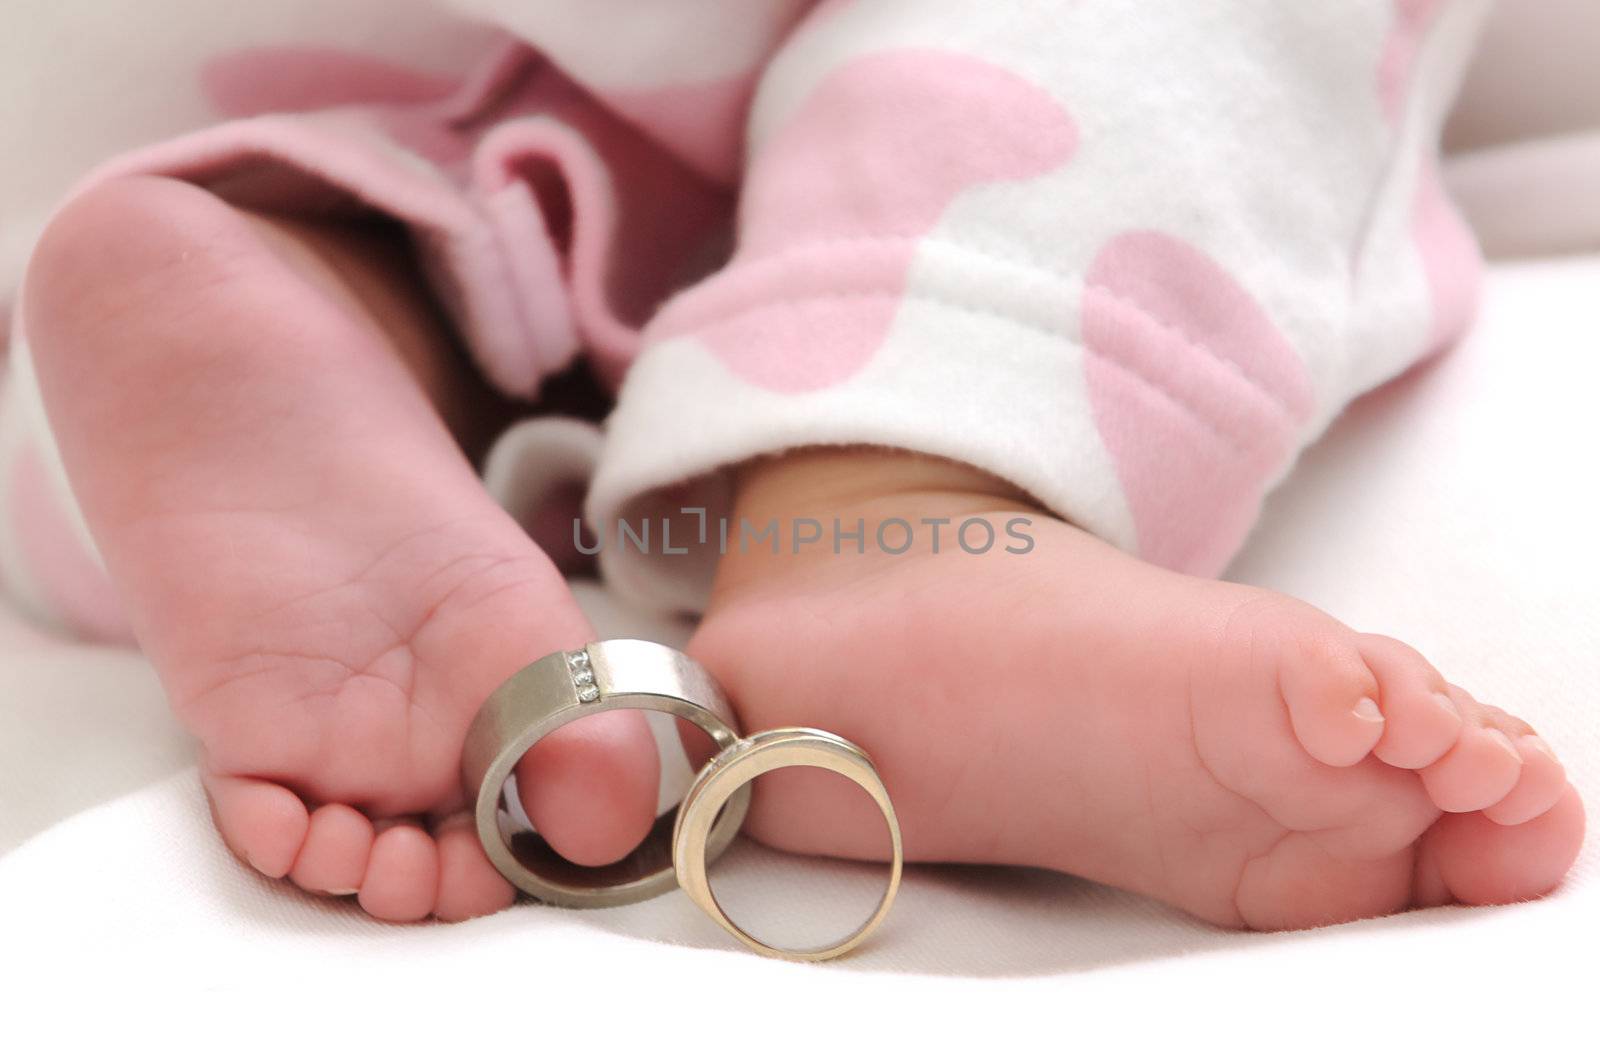 wedding rings on the toes of a baby girl by Ansunette